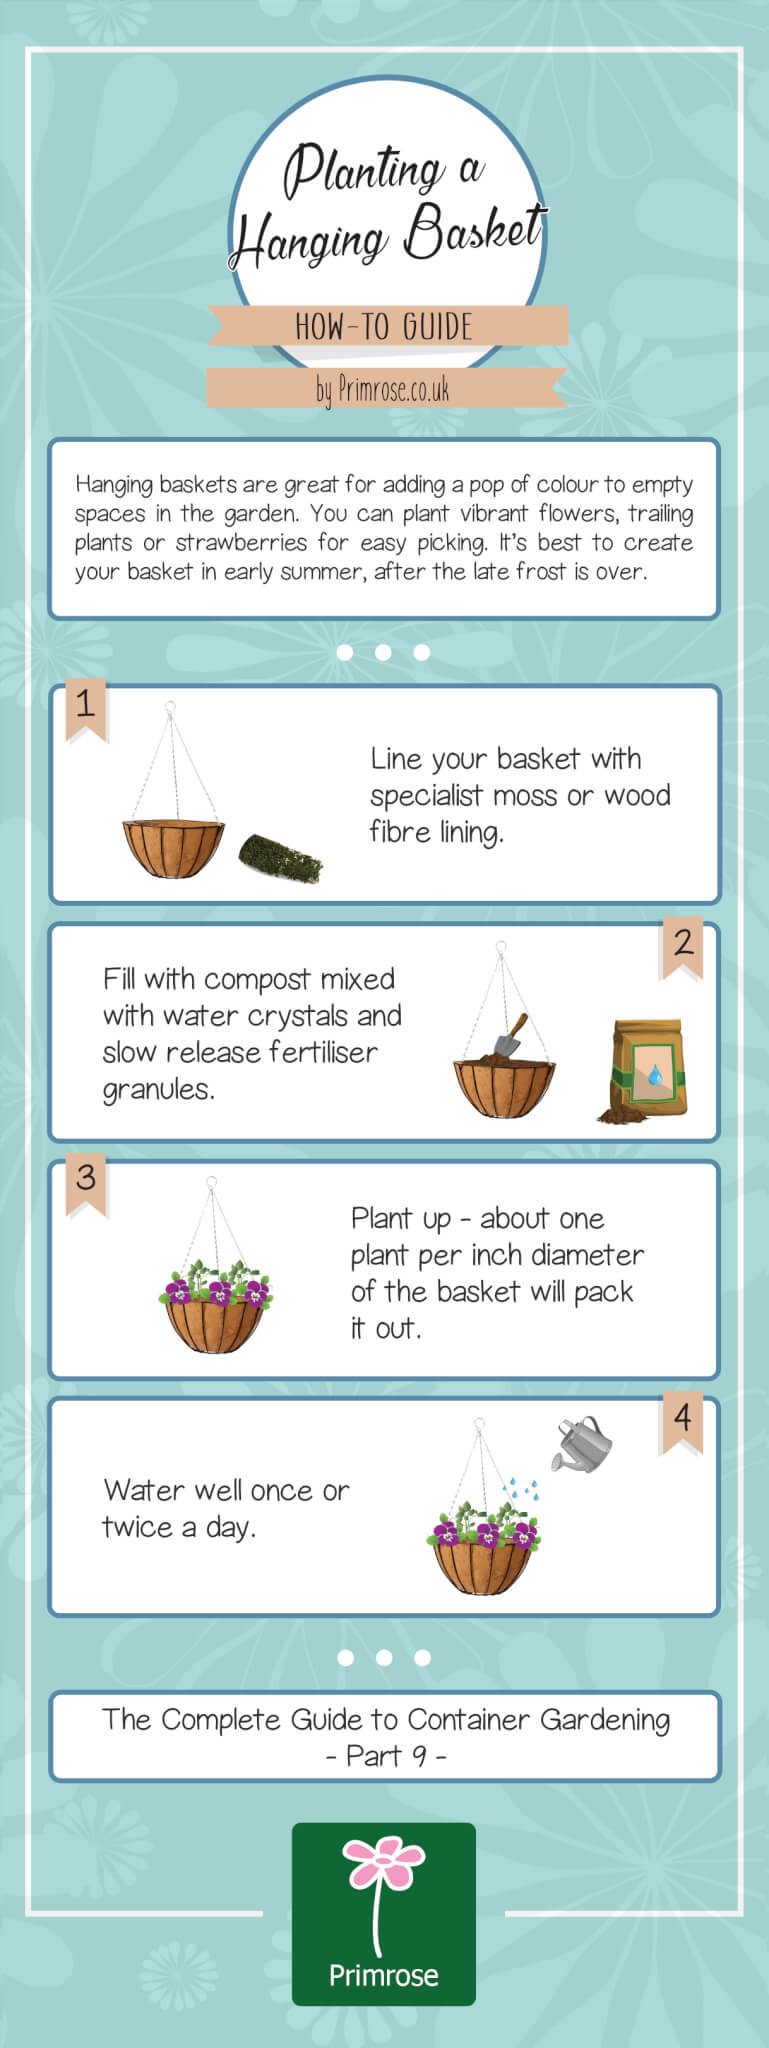 How to plant a hanging basket infographic